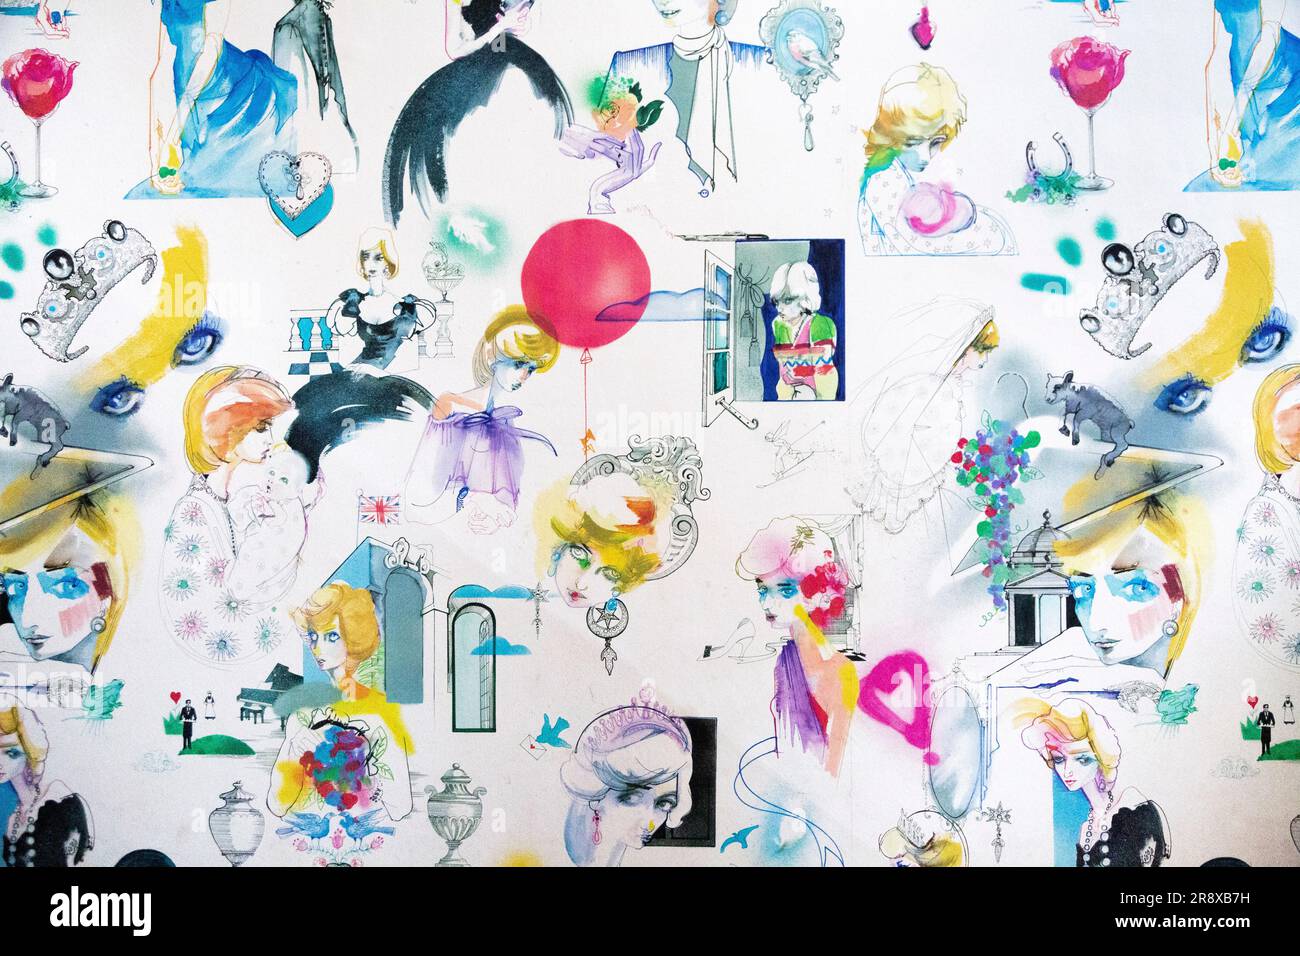 Wallpaper featuring Princess Diana by illustrator Julie Verhoeven, printed by Cole & Son, at Kensington Palace, London, England, UK Stock Photo